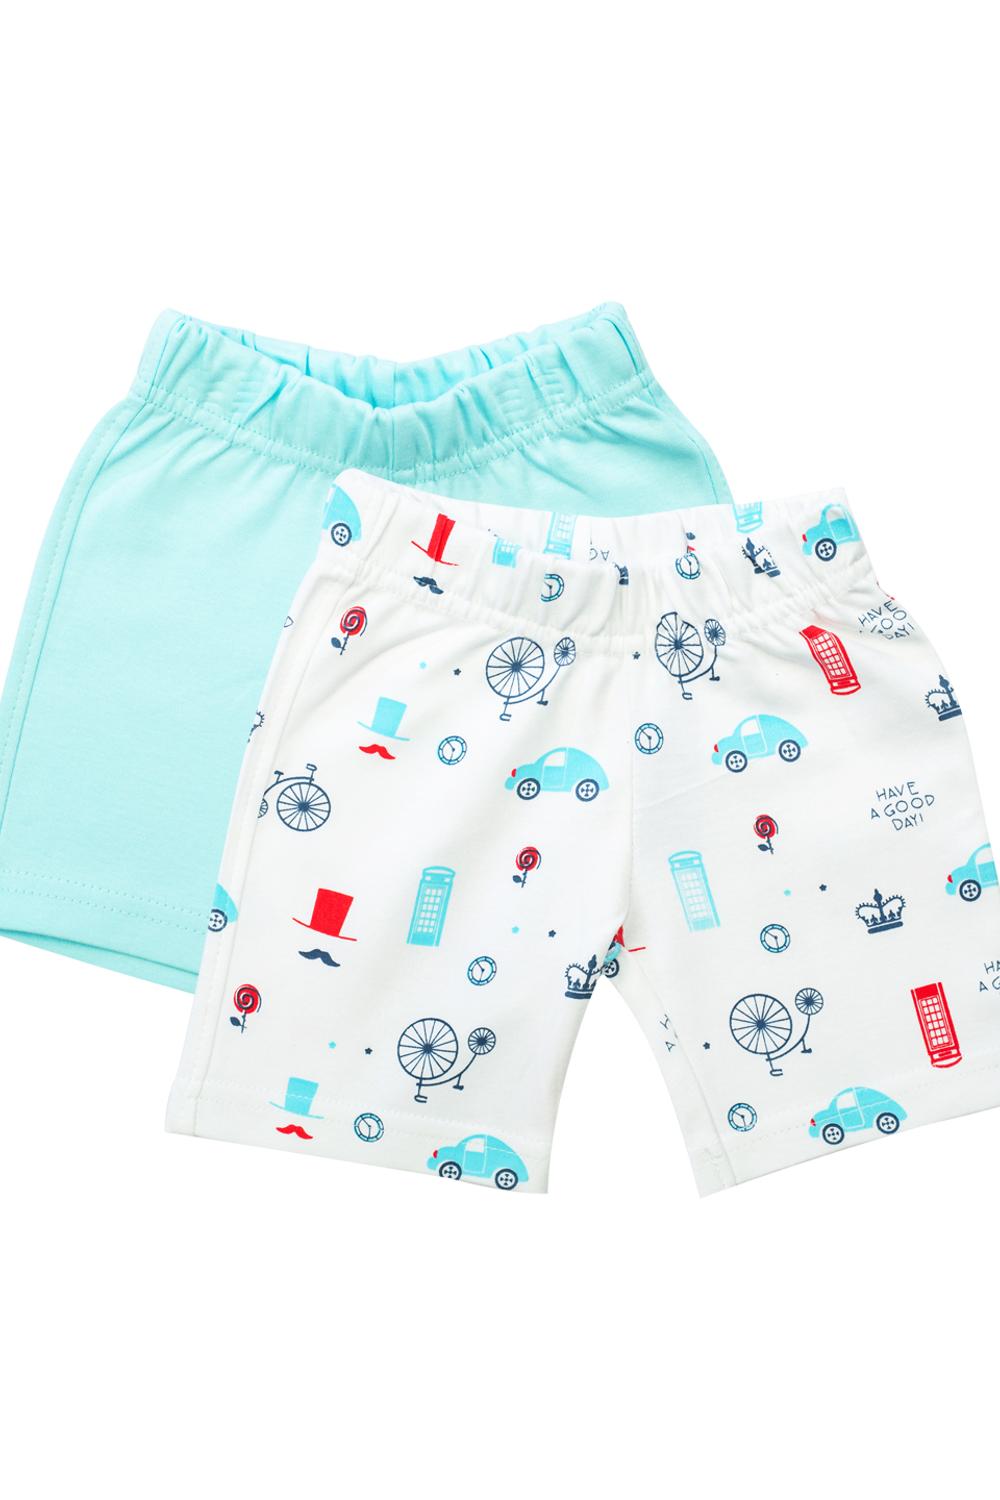 Mee Mee Shorts pack of 2 - Blue & White Printed